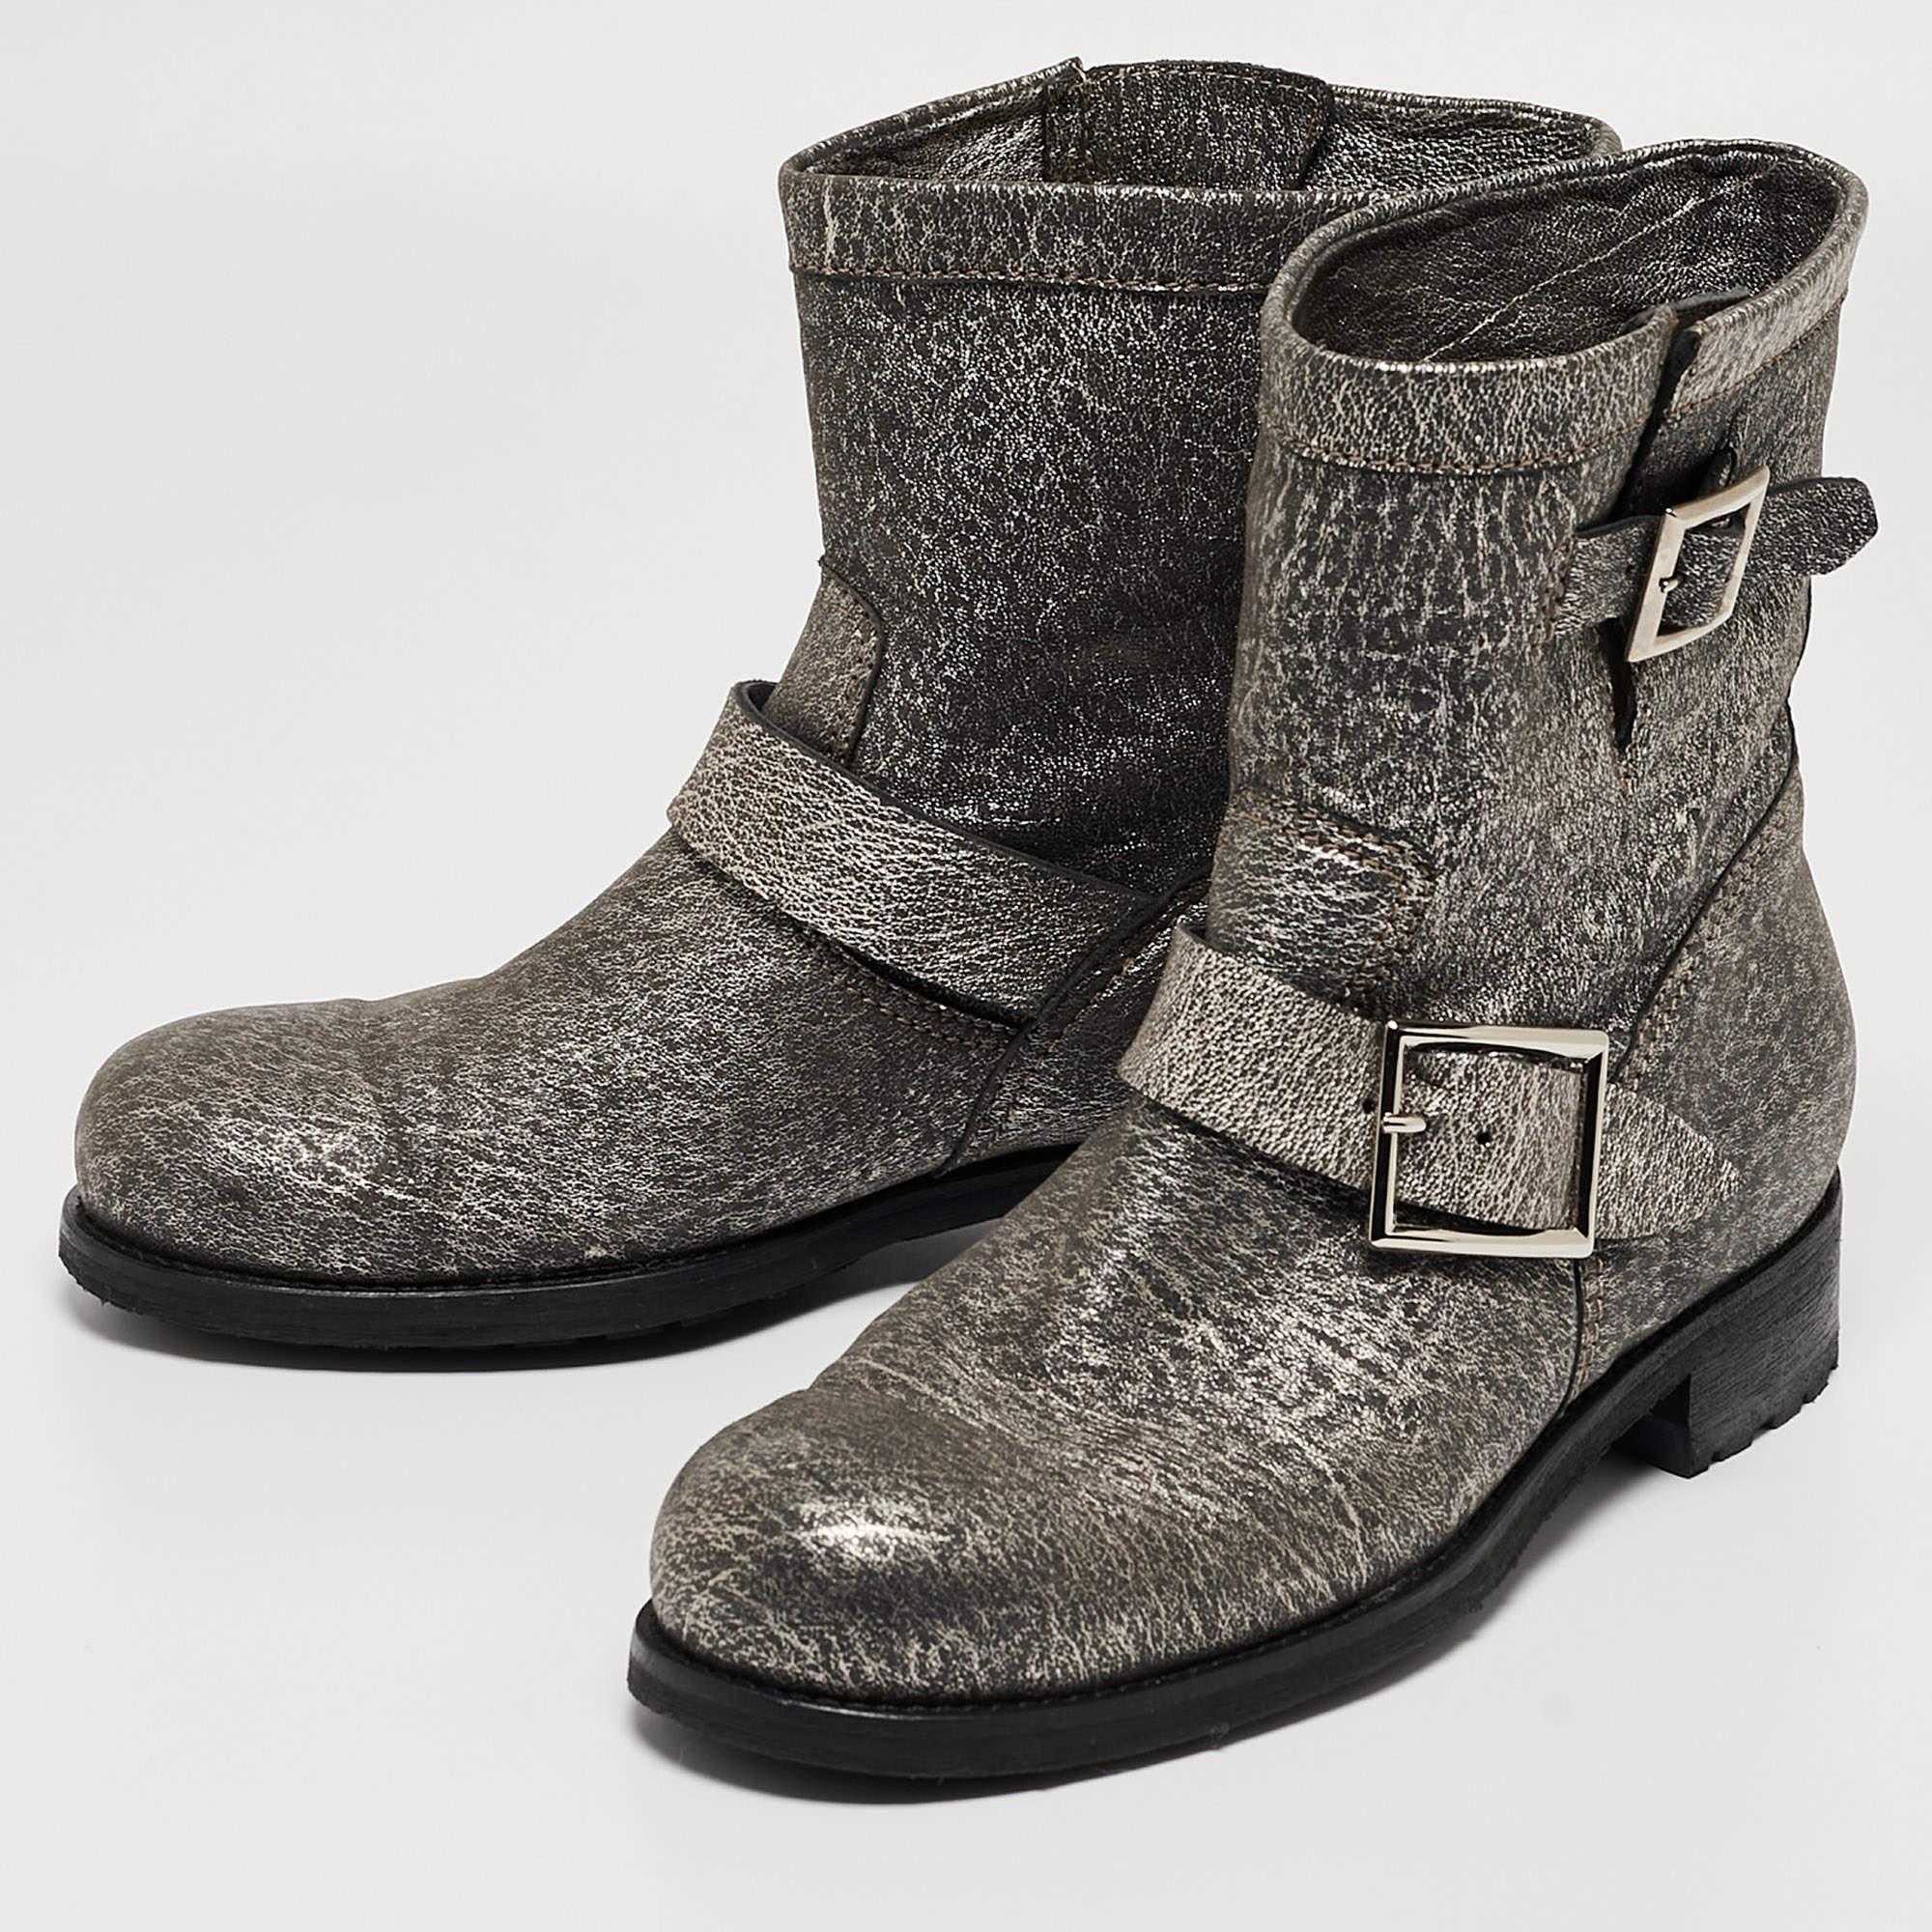 Boots are an essential part of your wardrobe, and these boots, crafted from top-quality materials, are a fine choice. Offering the best of comfort and style, this sturdy-soled pair would be great with a dress for a casual day out!

